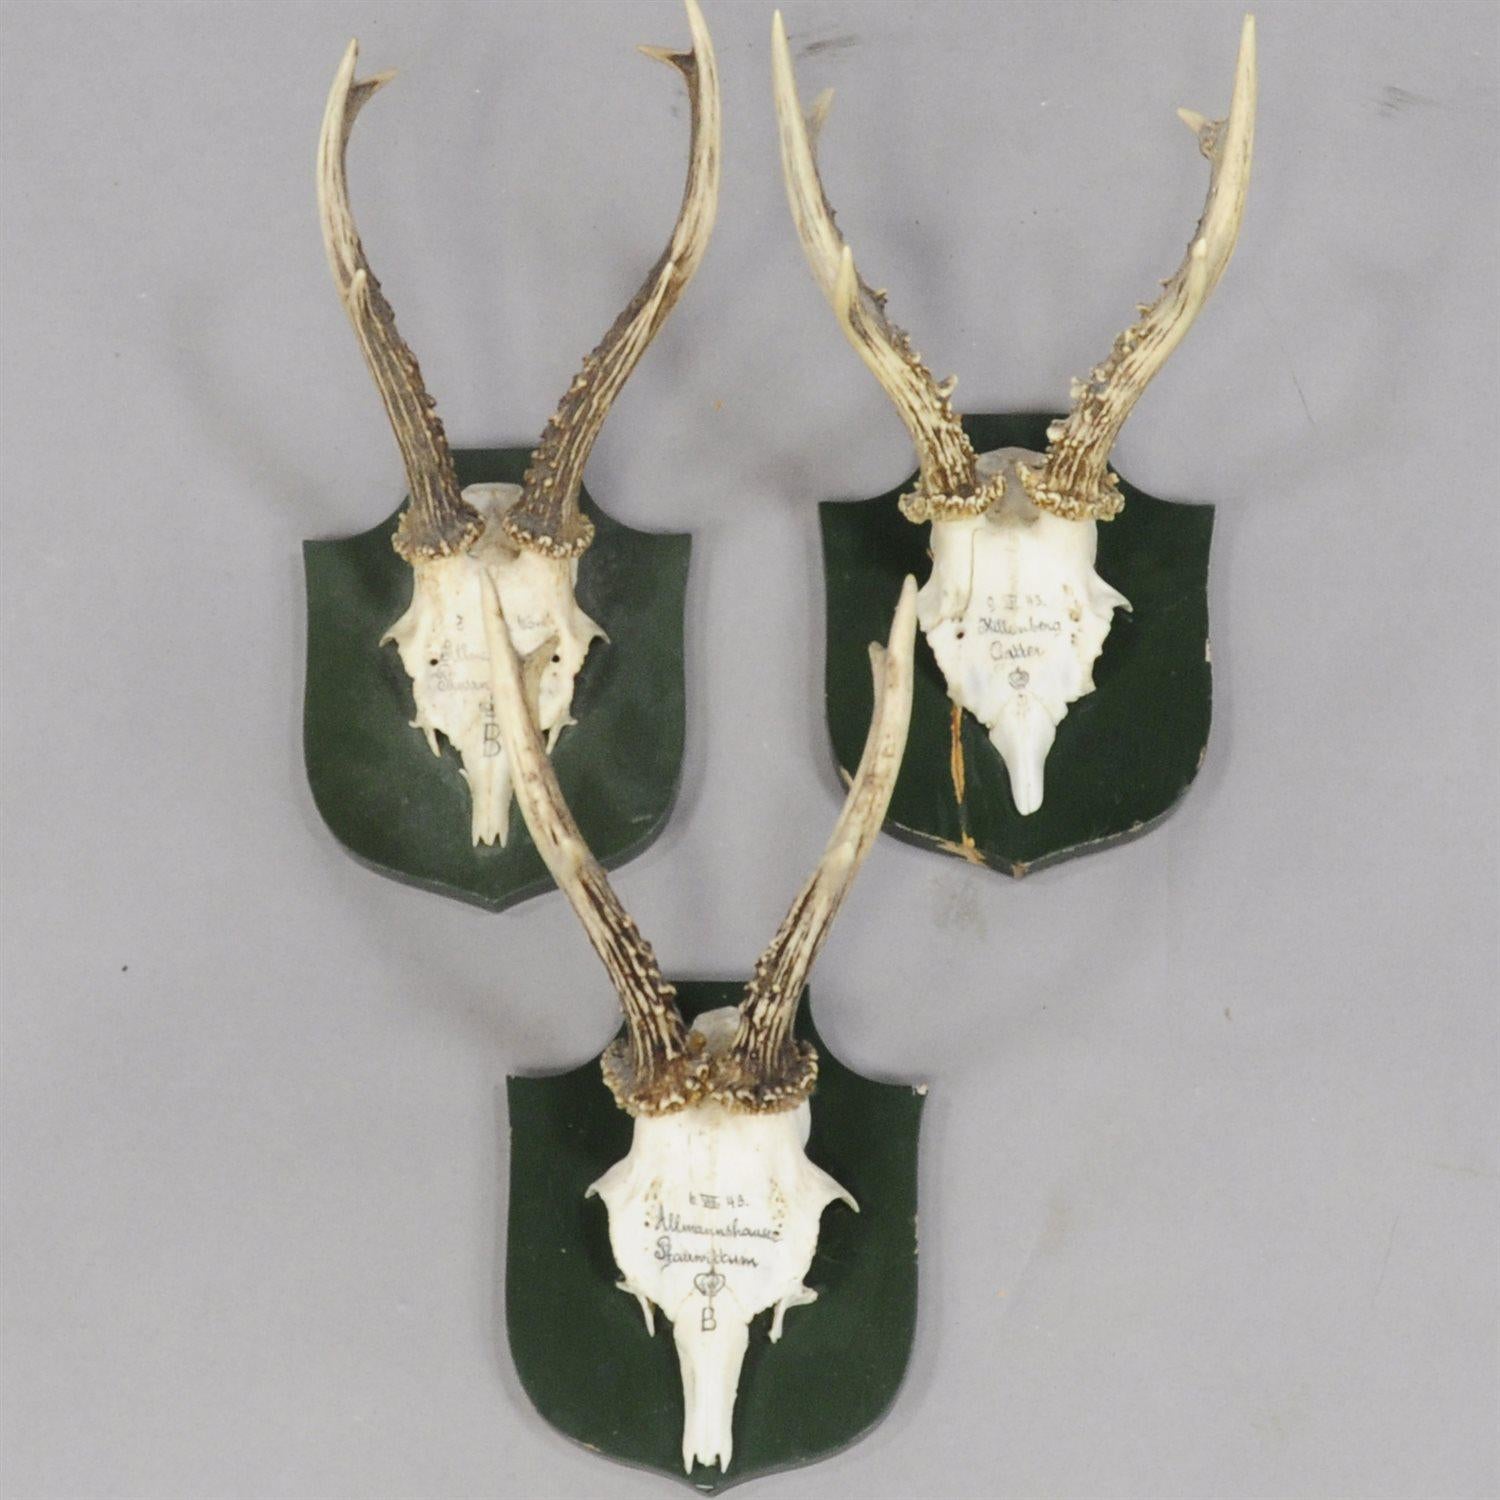 A set of six rare Black Forest deer trophies on wooden plaques. Remaining from the stately home of Palace Salem in South Germany. All trophies were shot by members of the family of margrave Maximilian of Baden. Handwritten inscriptions on the sculls